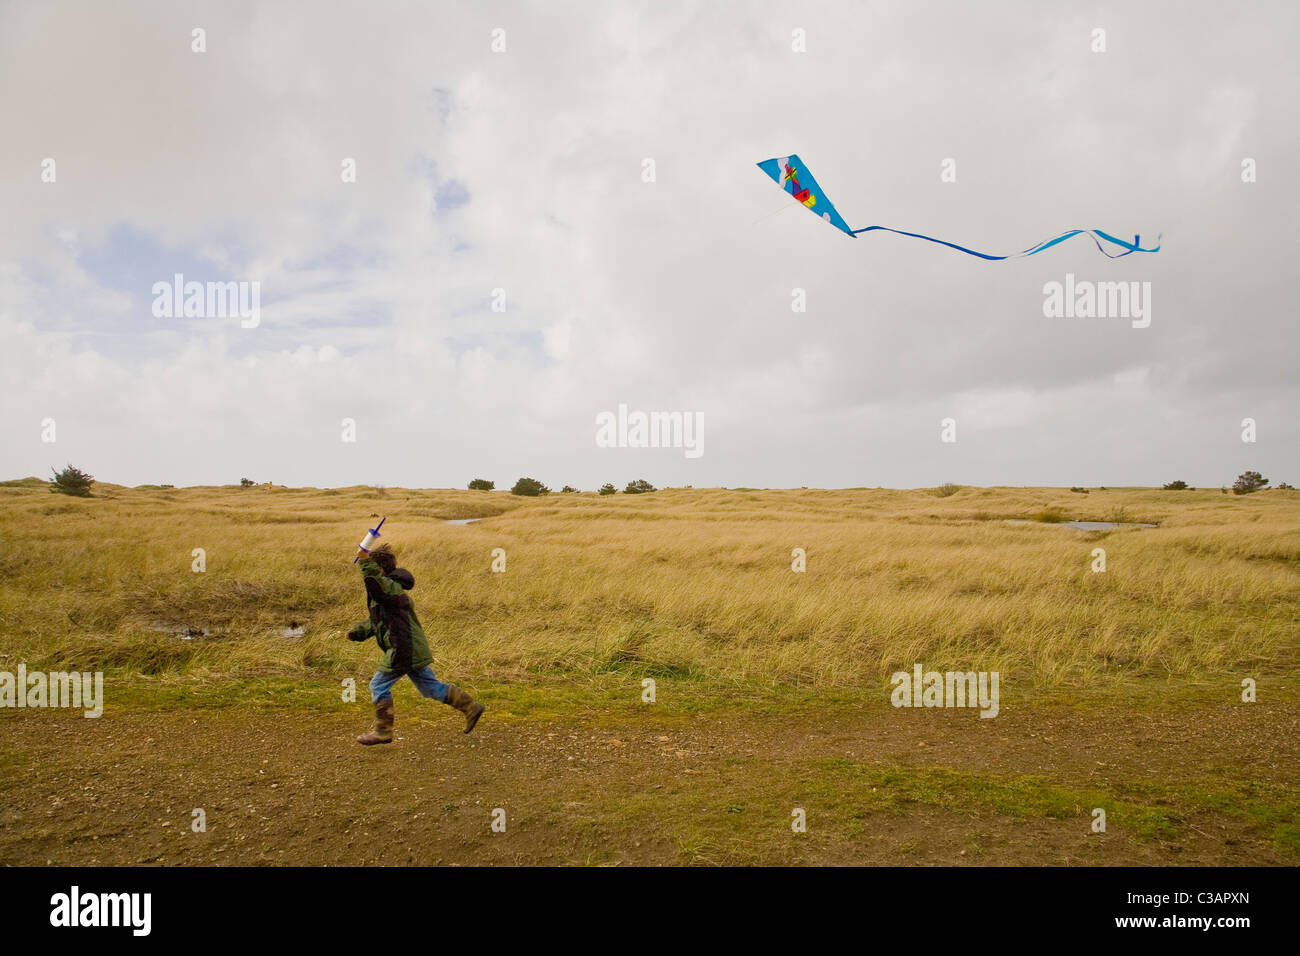 boy running with kite in air Stock Photo